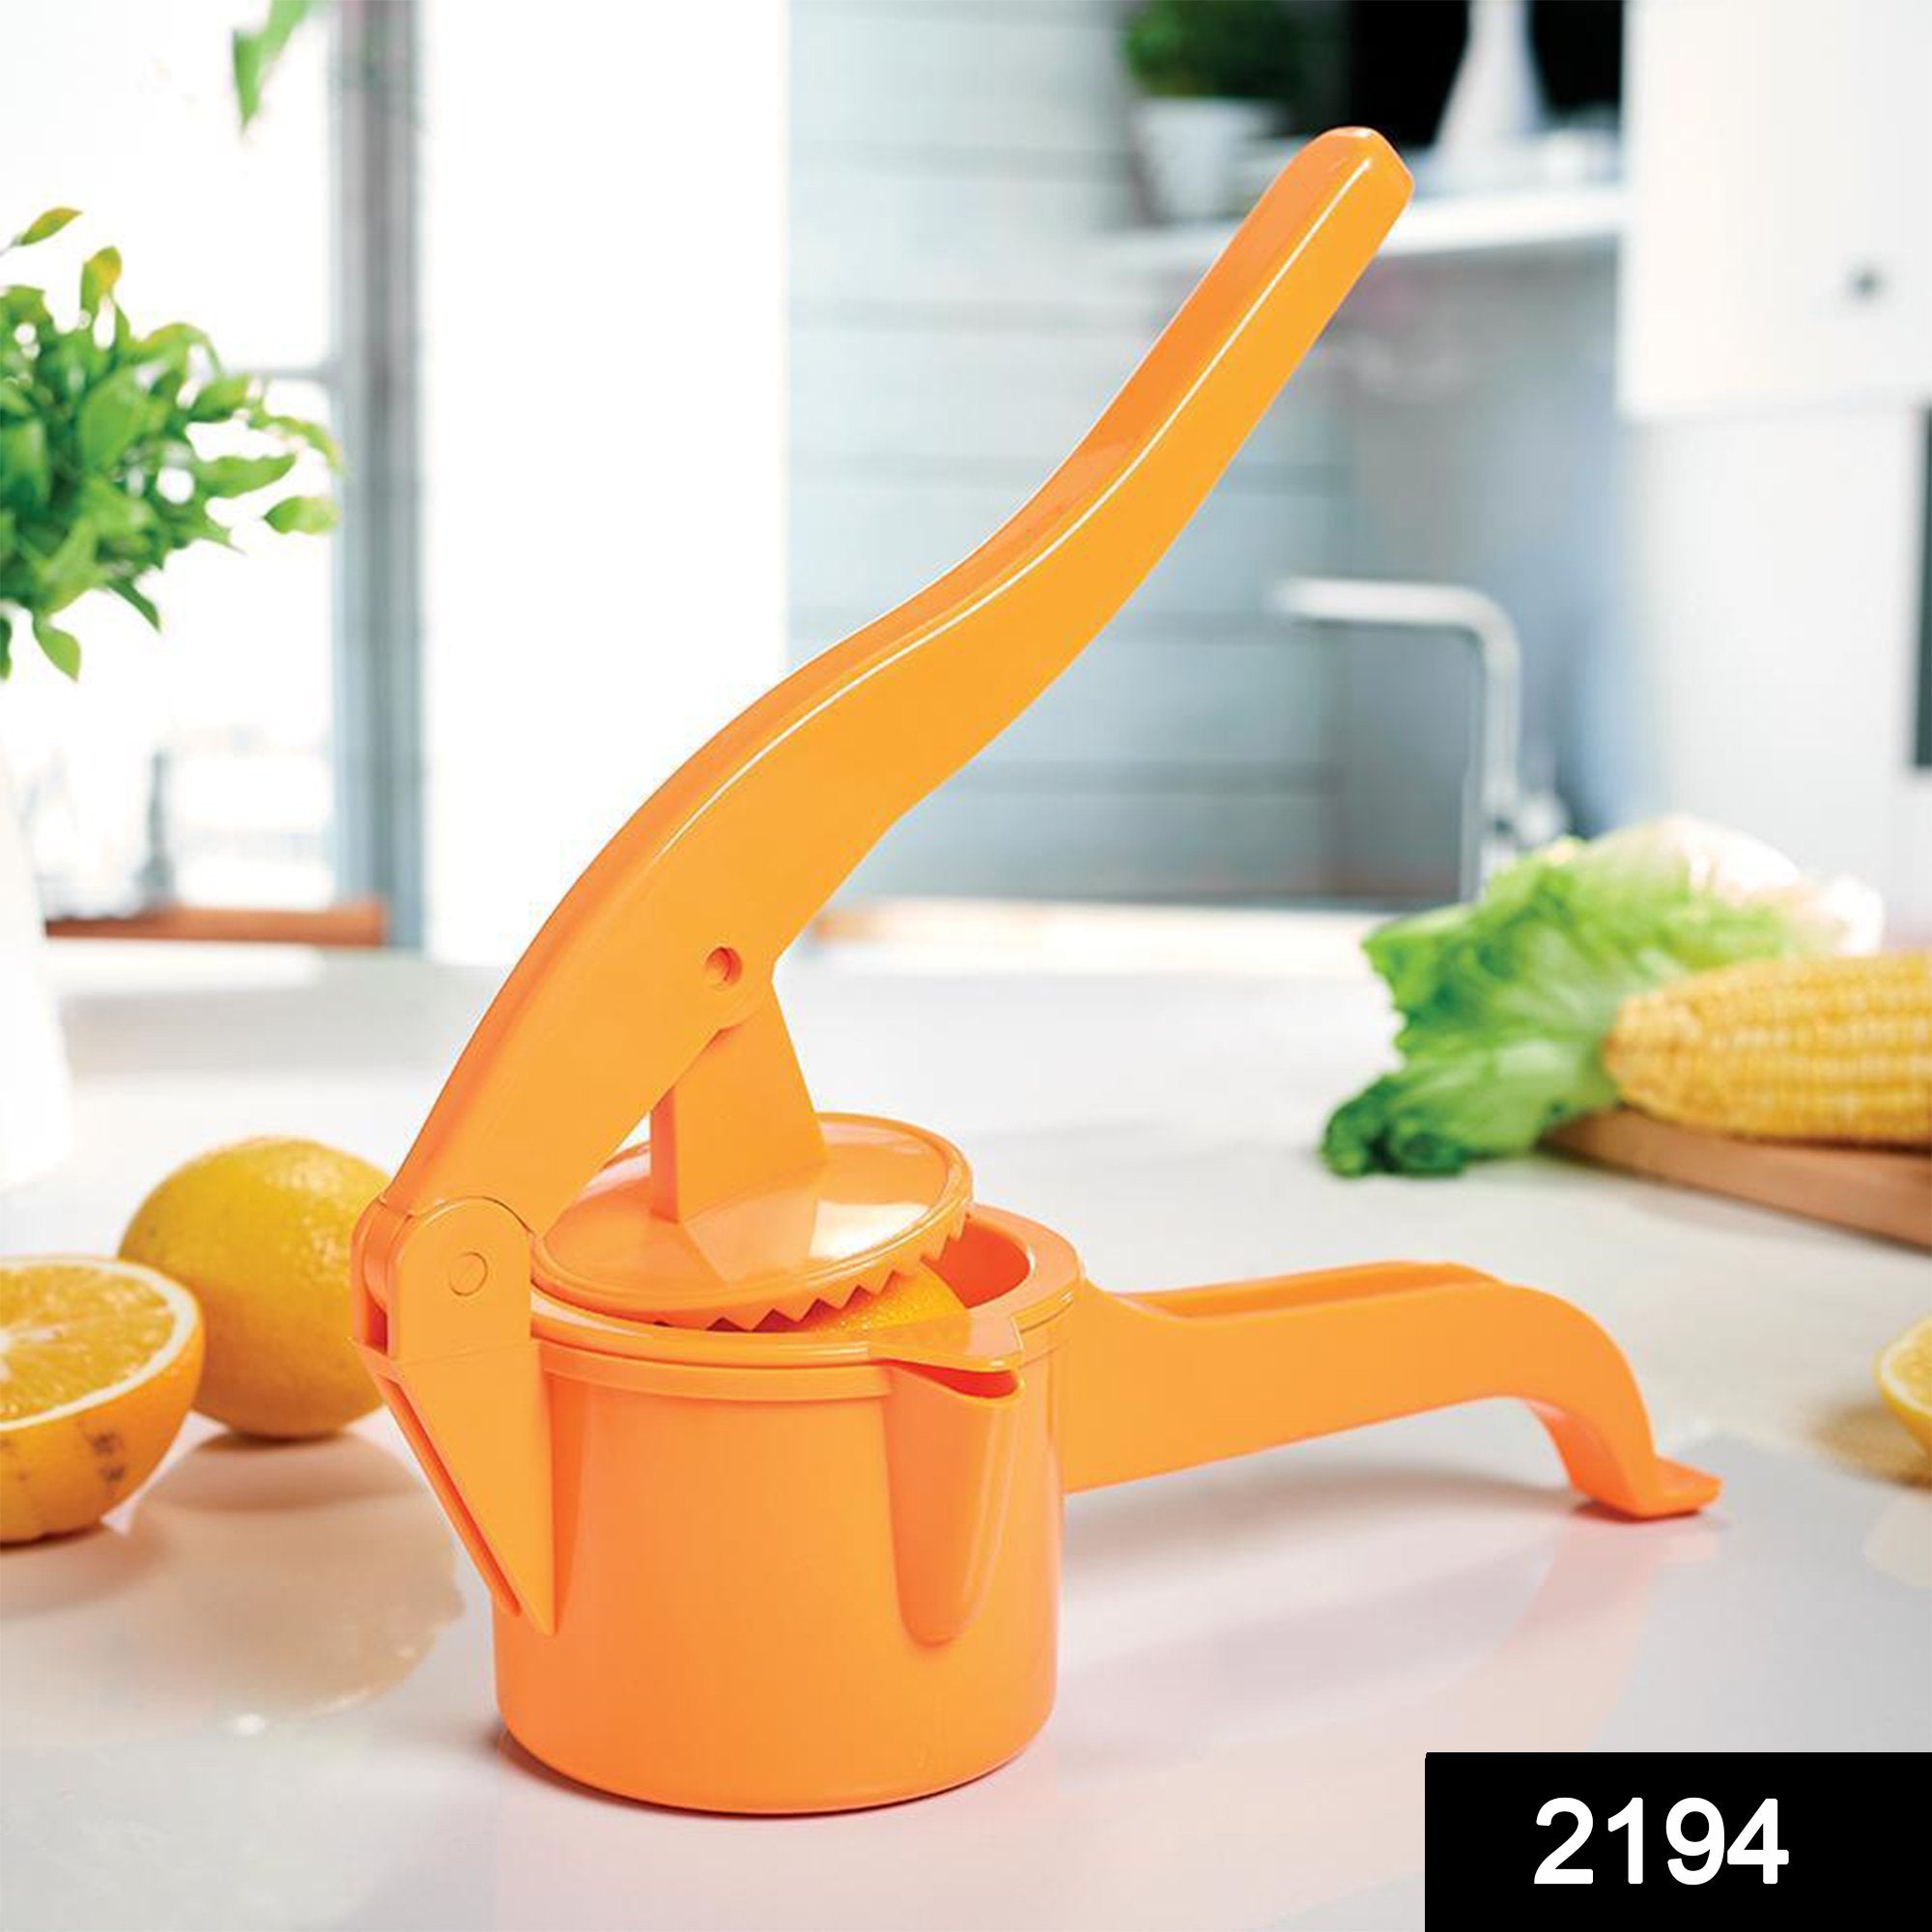 2194 2 in 1 Lemon Squeezer Manual Hand Squeeze Tool and Juicer - SkyShopy